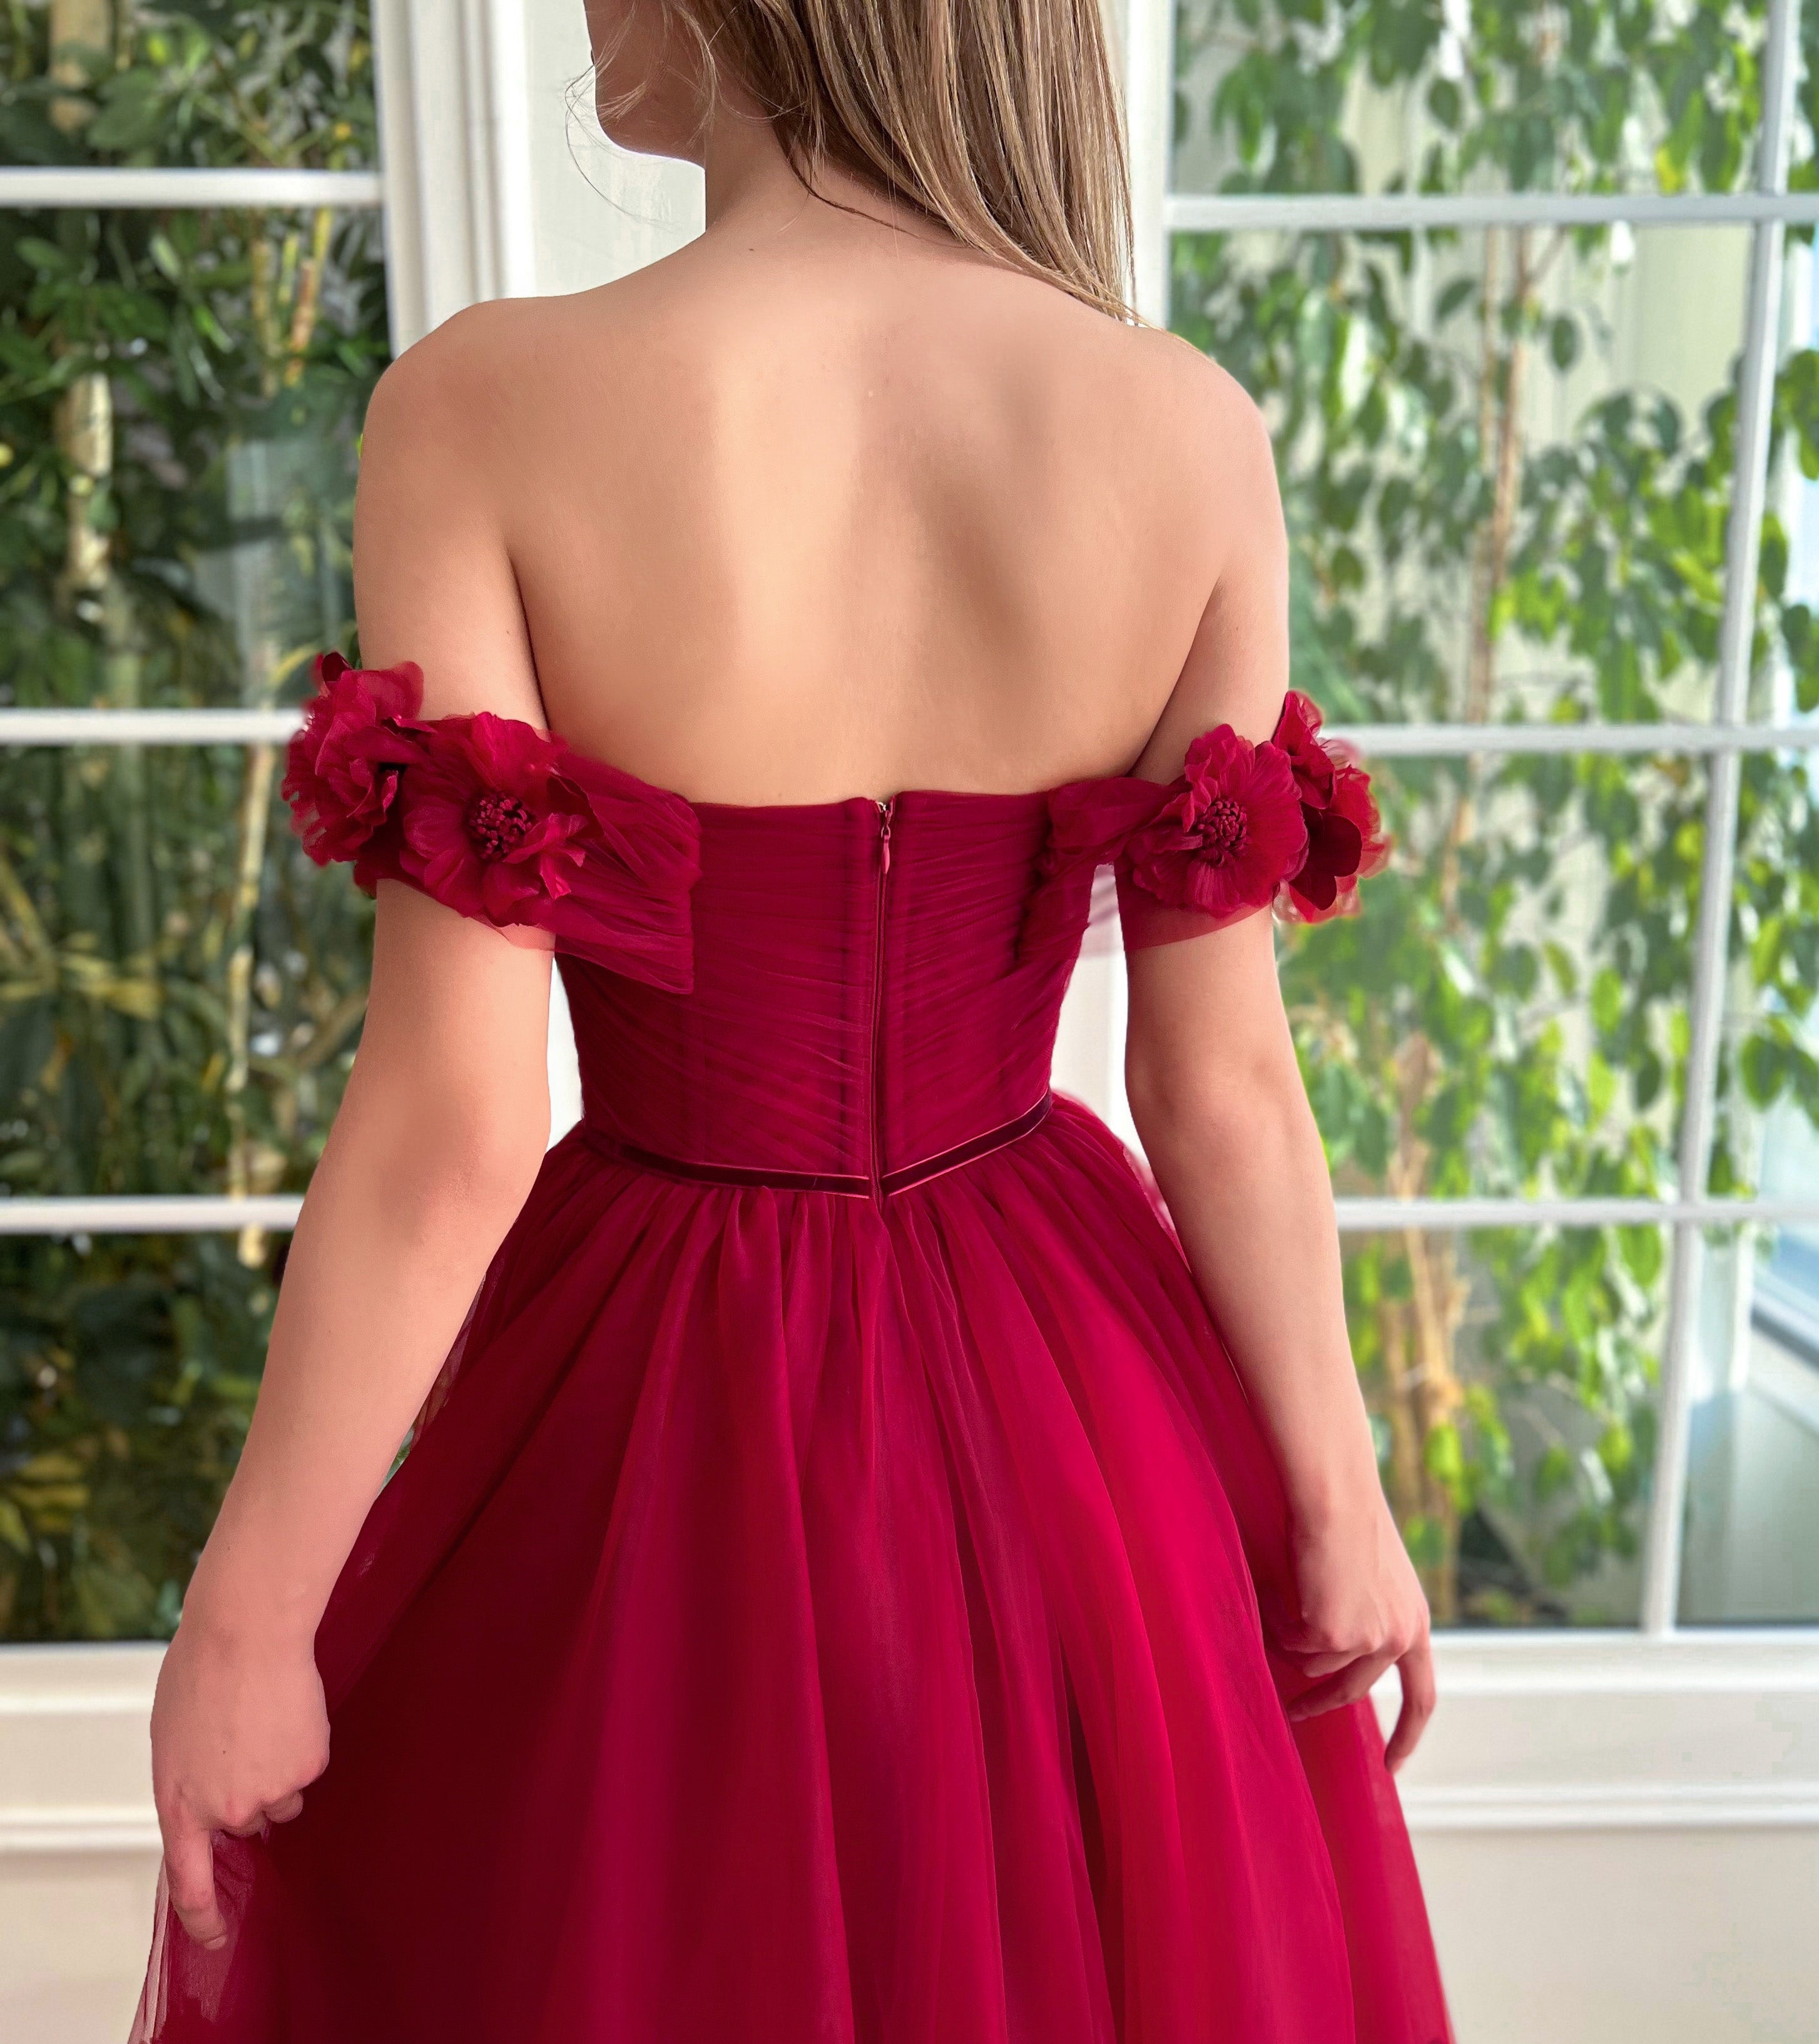 Red A-Line dress with embroidery, flowers and off the shoulder sleeves